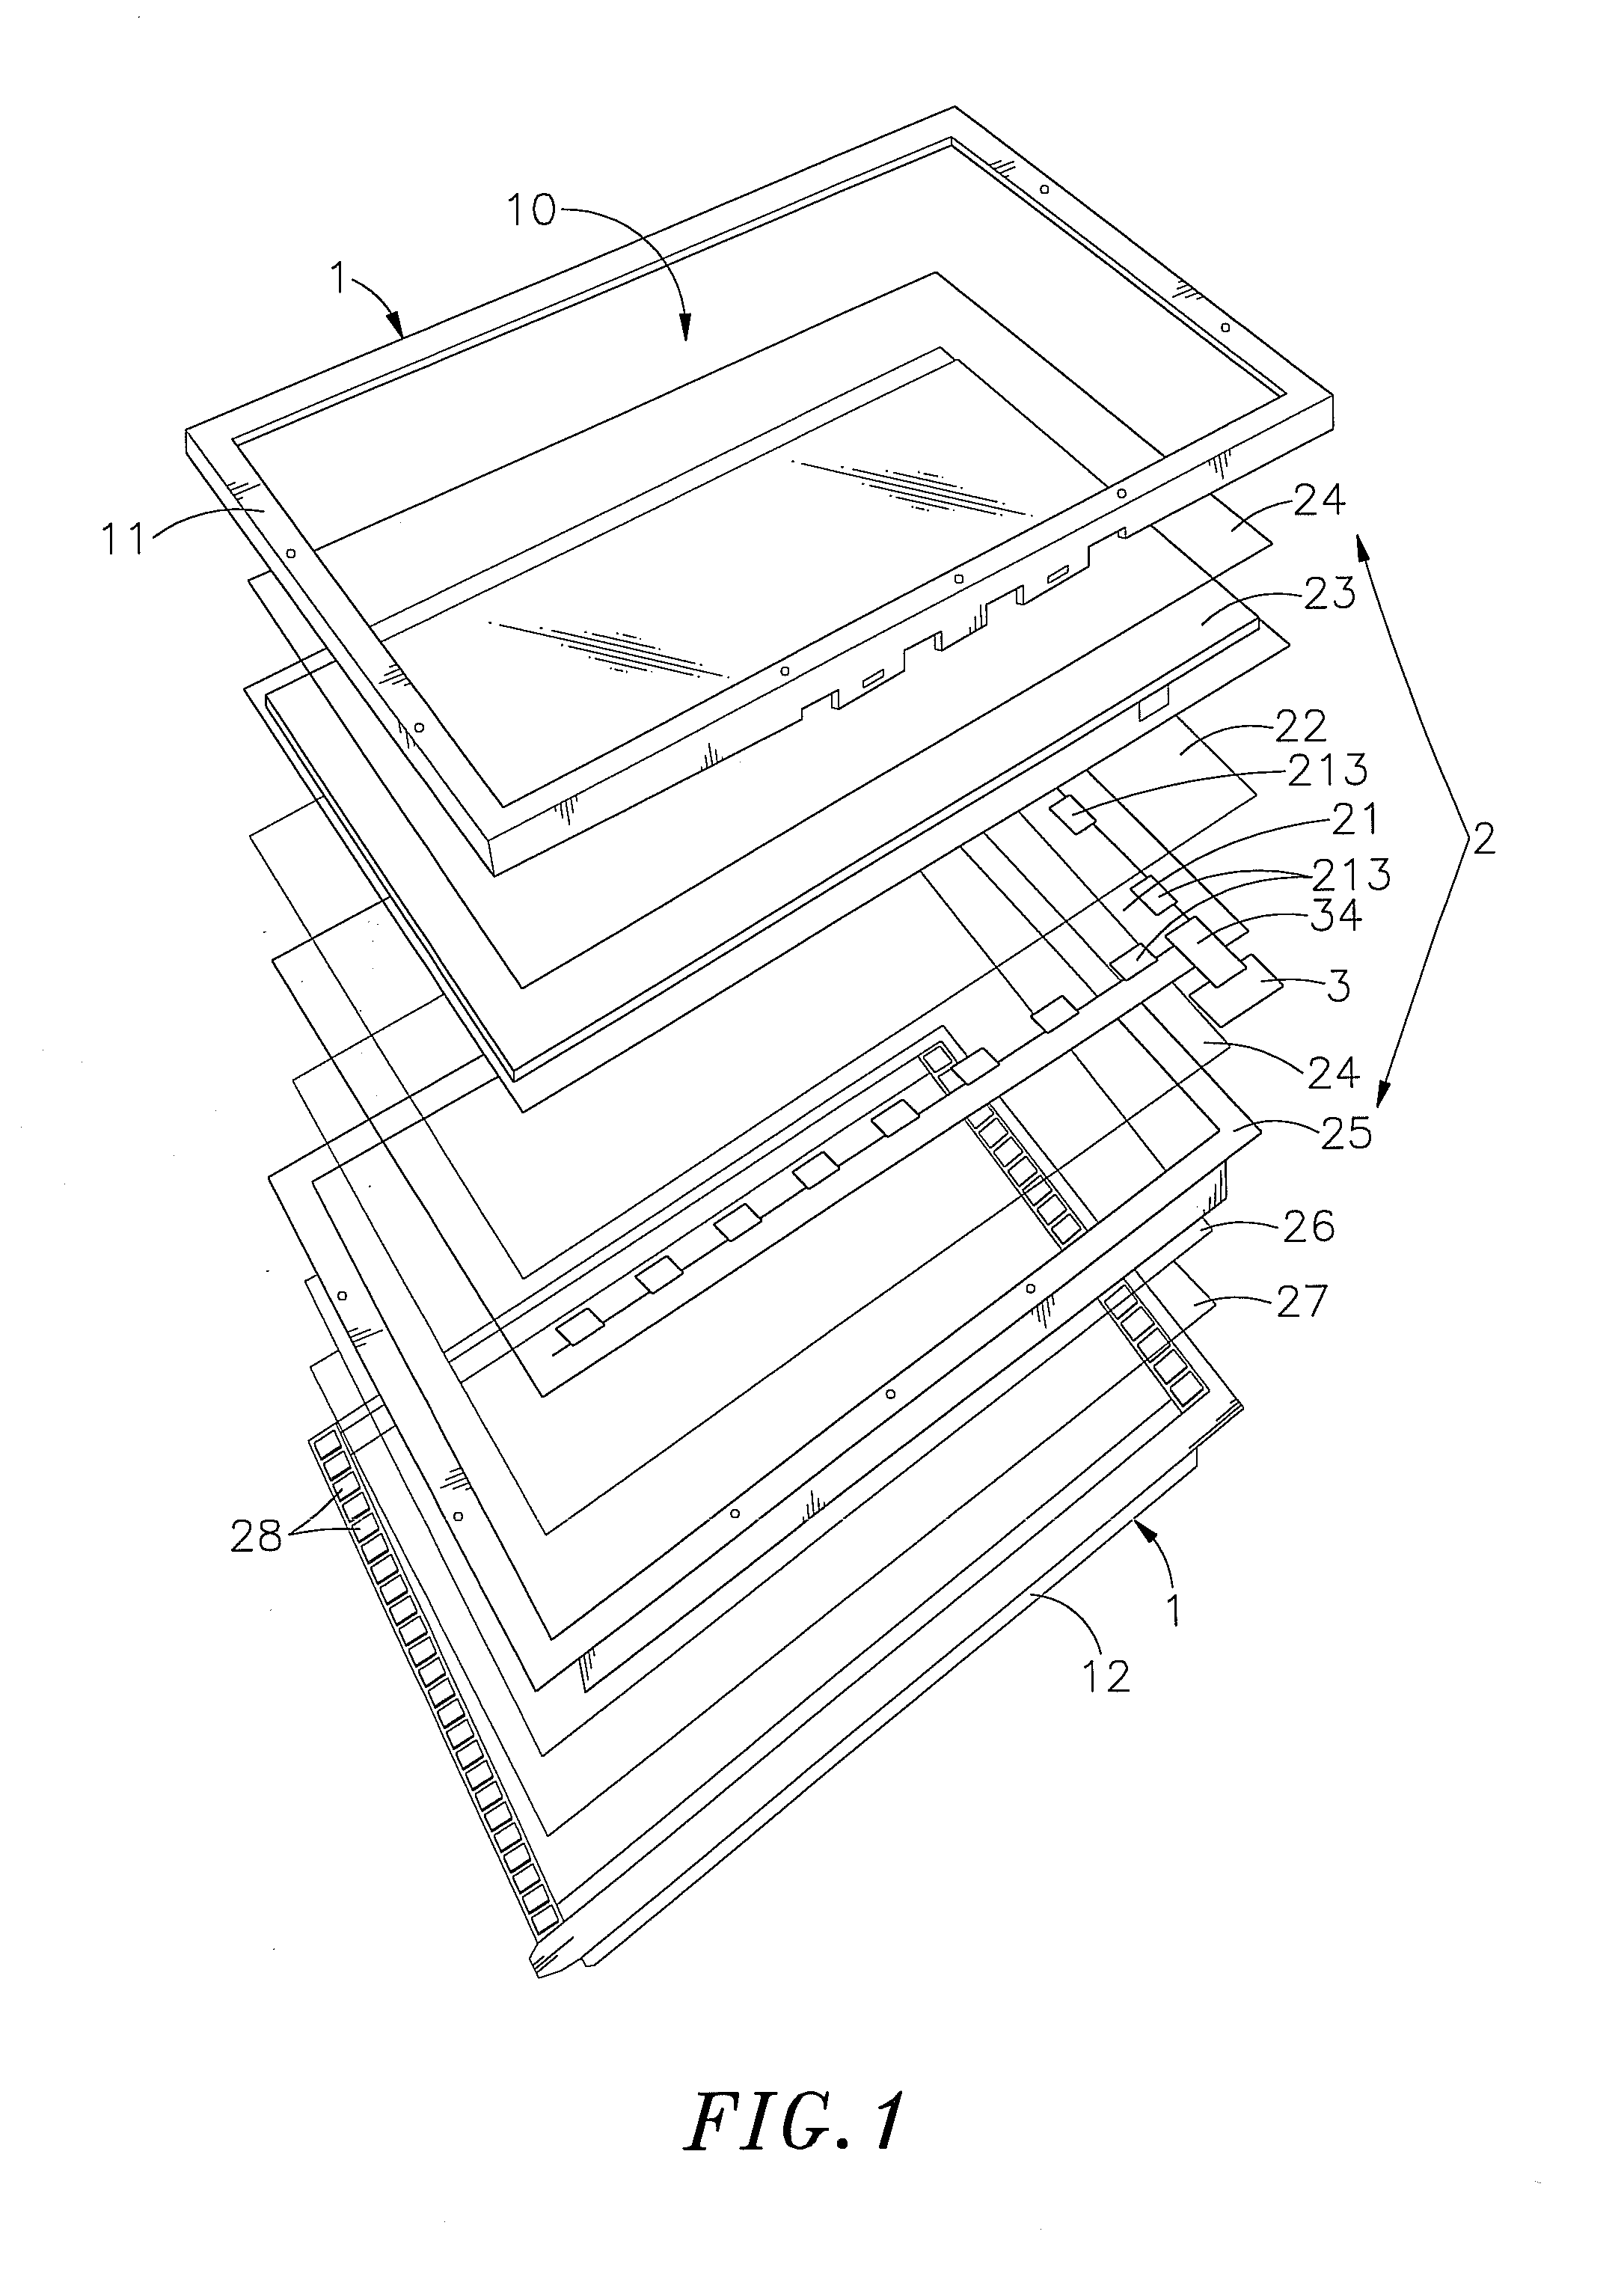 Display panel with network communication function